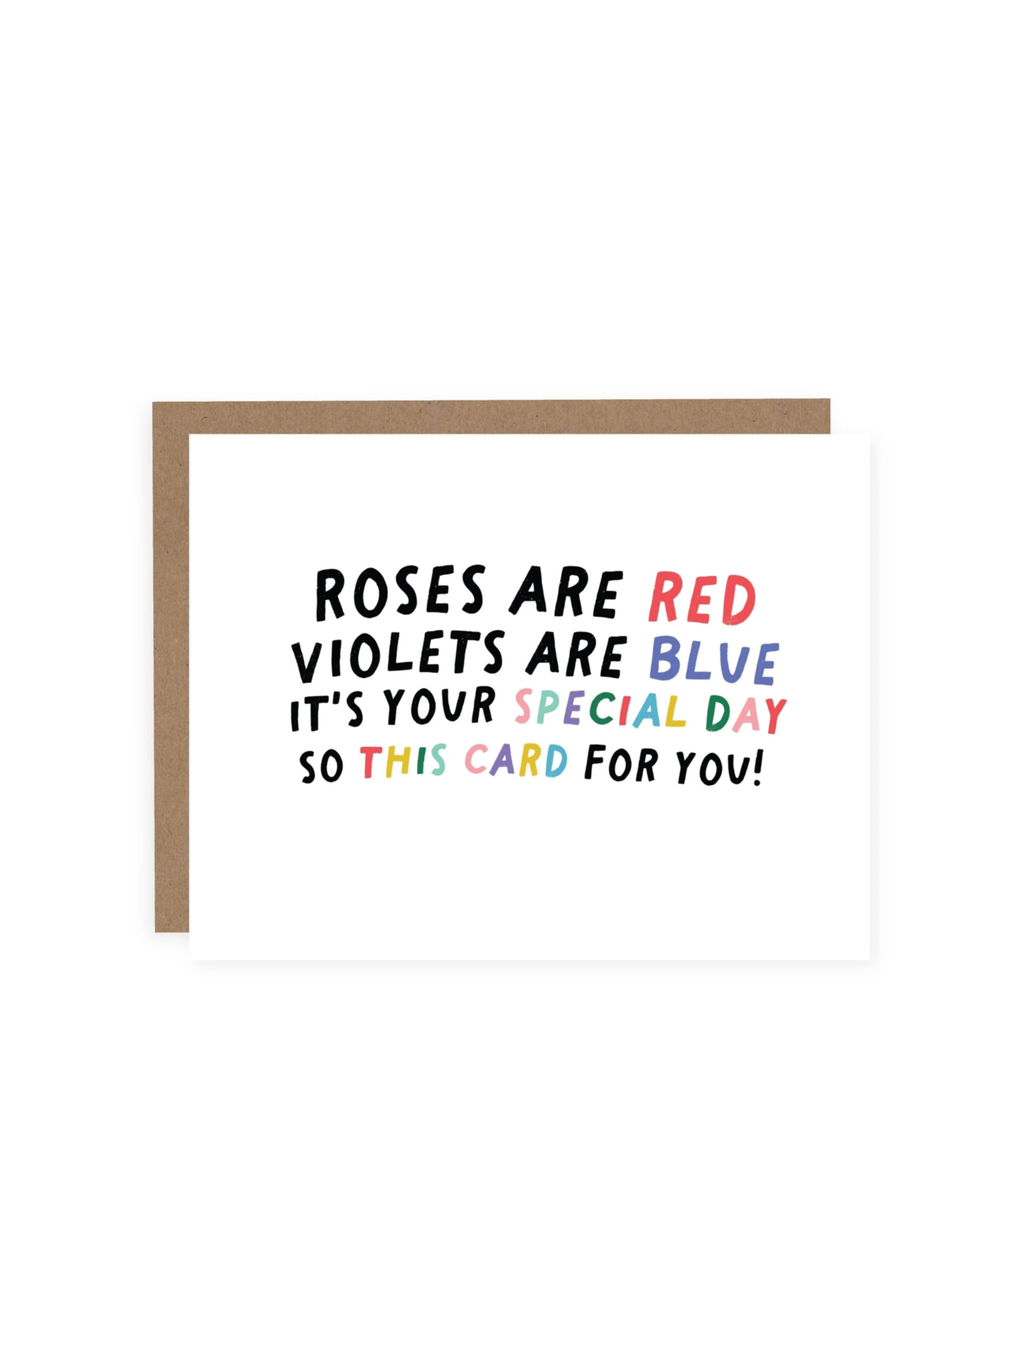 Roses are Red Card